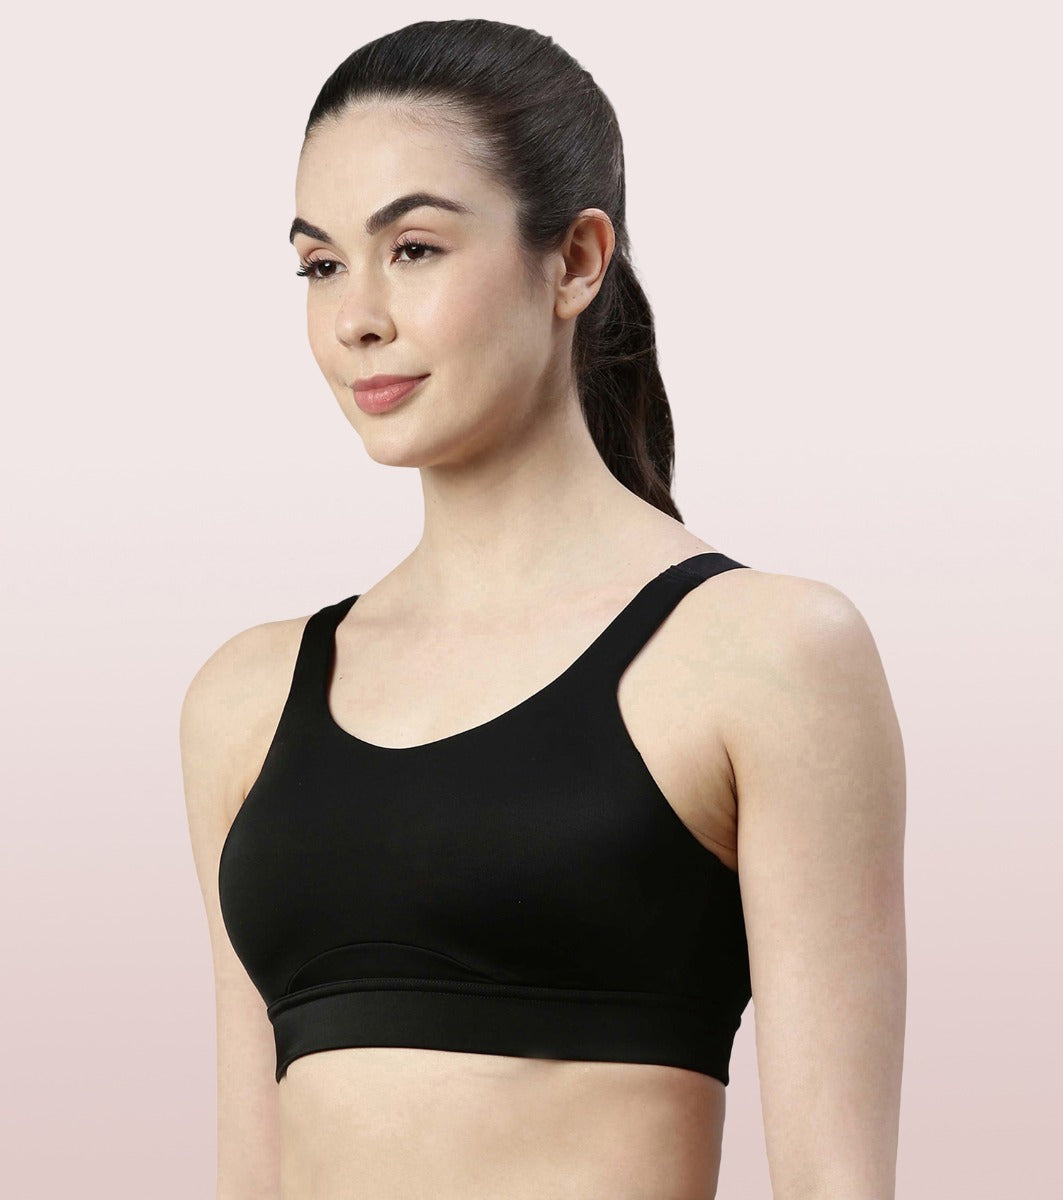 Enamor Agion SB18 Convertible Back High-Impact Sports Bra for Women- Full Coverage, Padded and Wirefree - Black